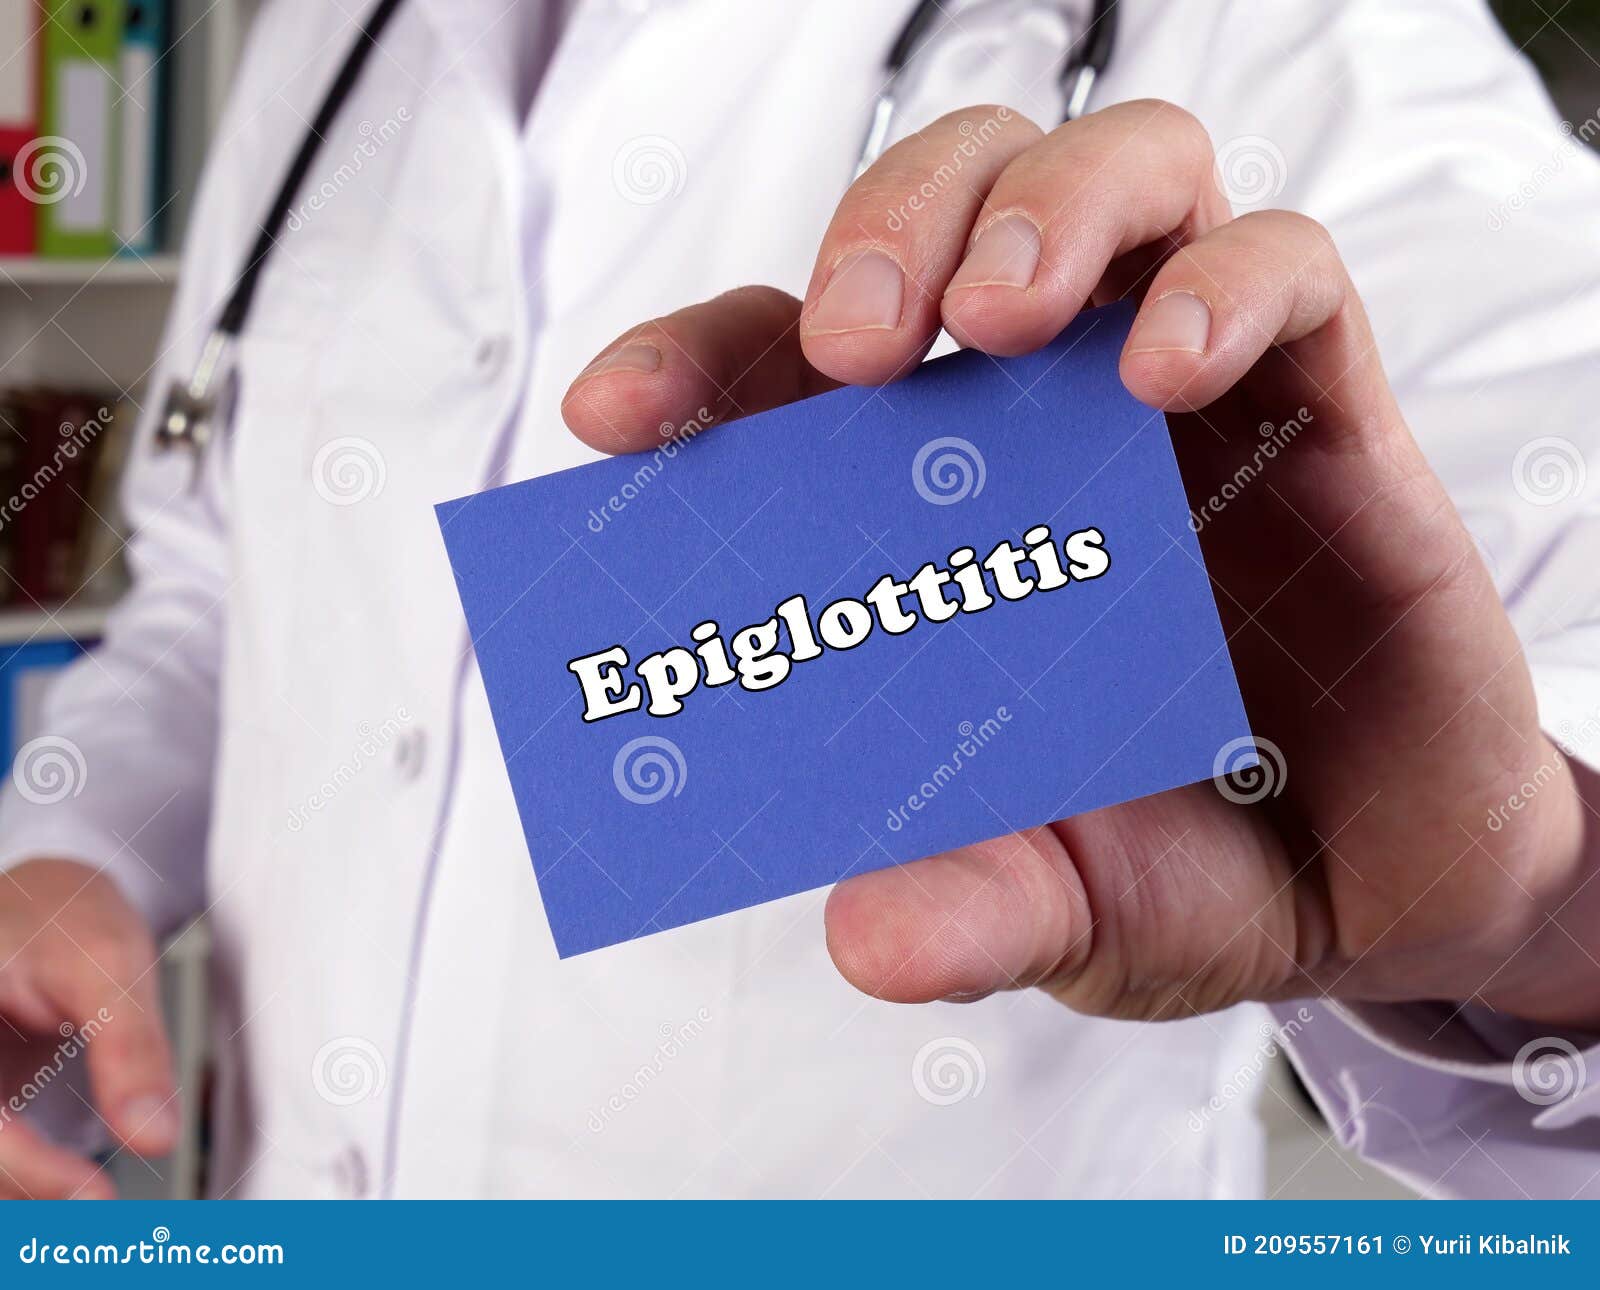 medical concept meaning epiglottitis with inscription on the page